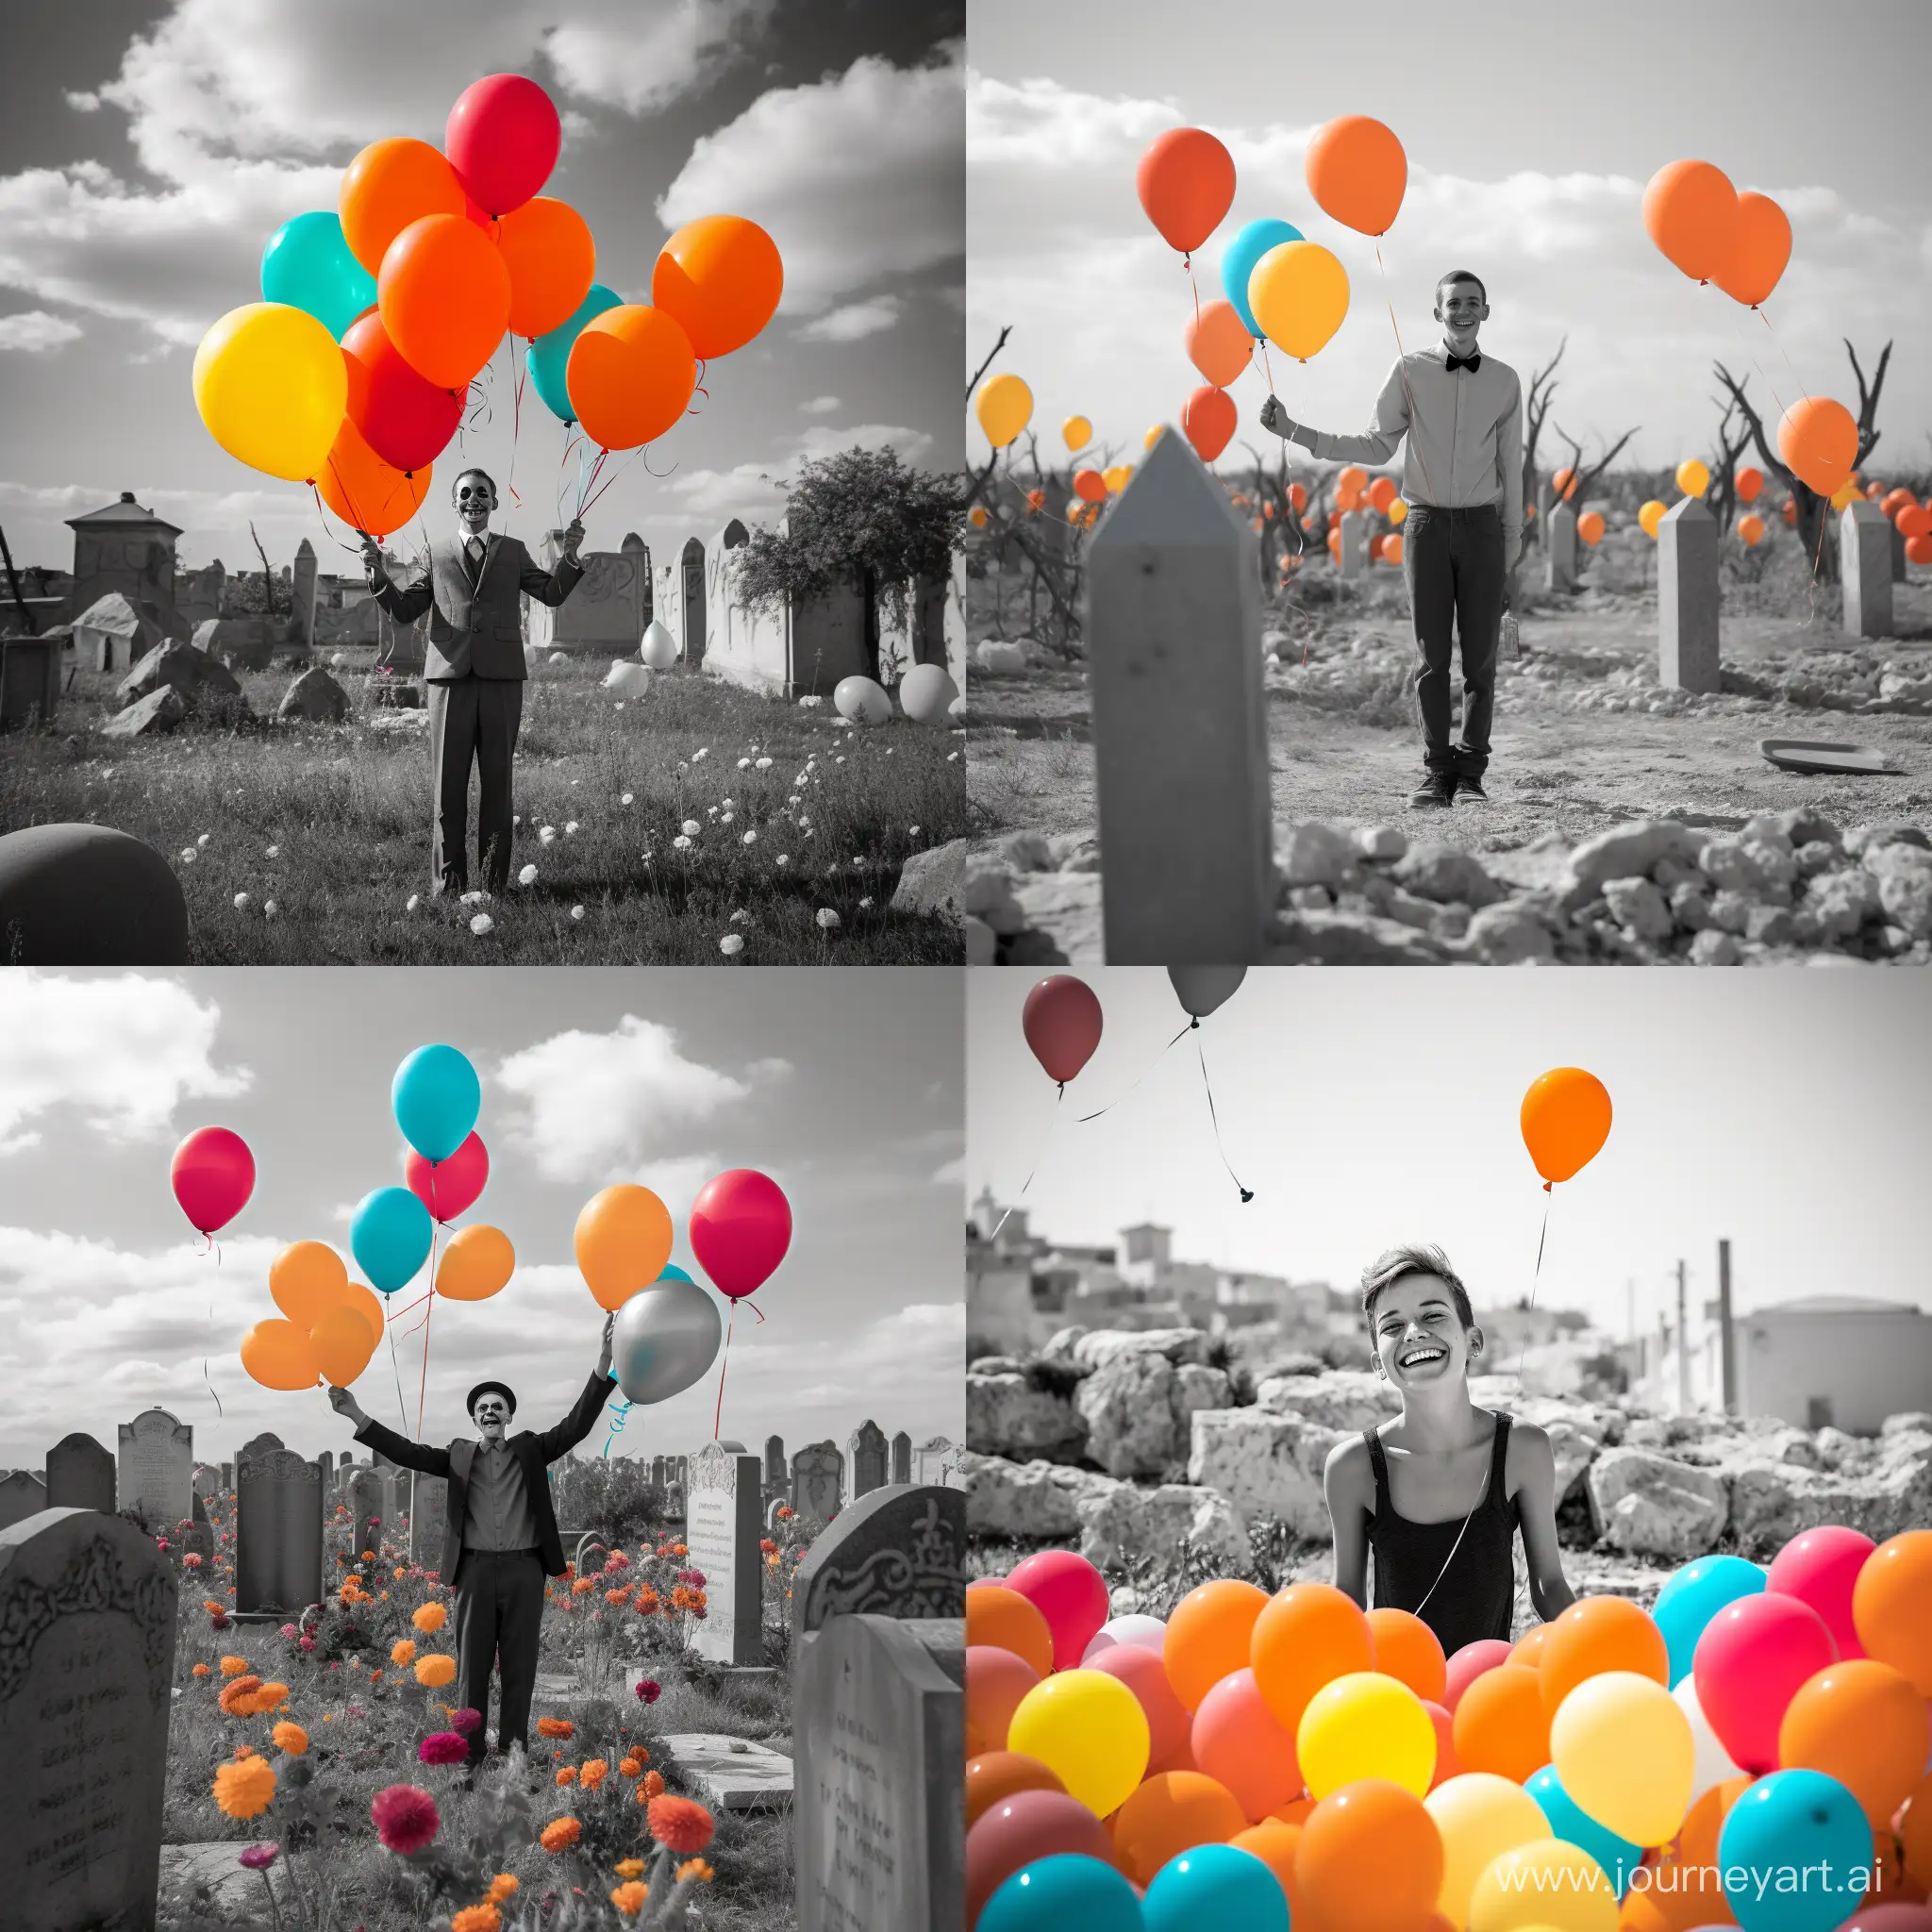 A clearly joyful and smiling person with a distinct happy expression, surrounded by colorful balloons, is standing in the middle of a desolate, colorless cemetery. The person  with a bright, open smile. The balloons are bright and glossy, with colors like orange, pink, yellow, and turquoise standing out vividly against the monochrome cemetery scene filled with old tombstones and lifeless trees. The image should evoke a strong contrast between the cheerful demeanor of the person and the starkness of the graveyard setting.